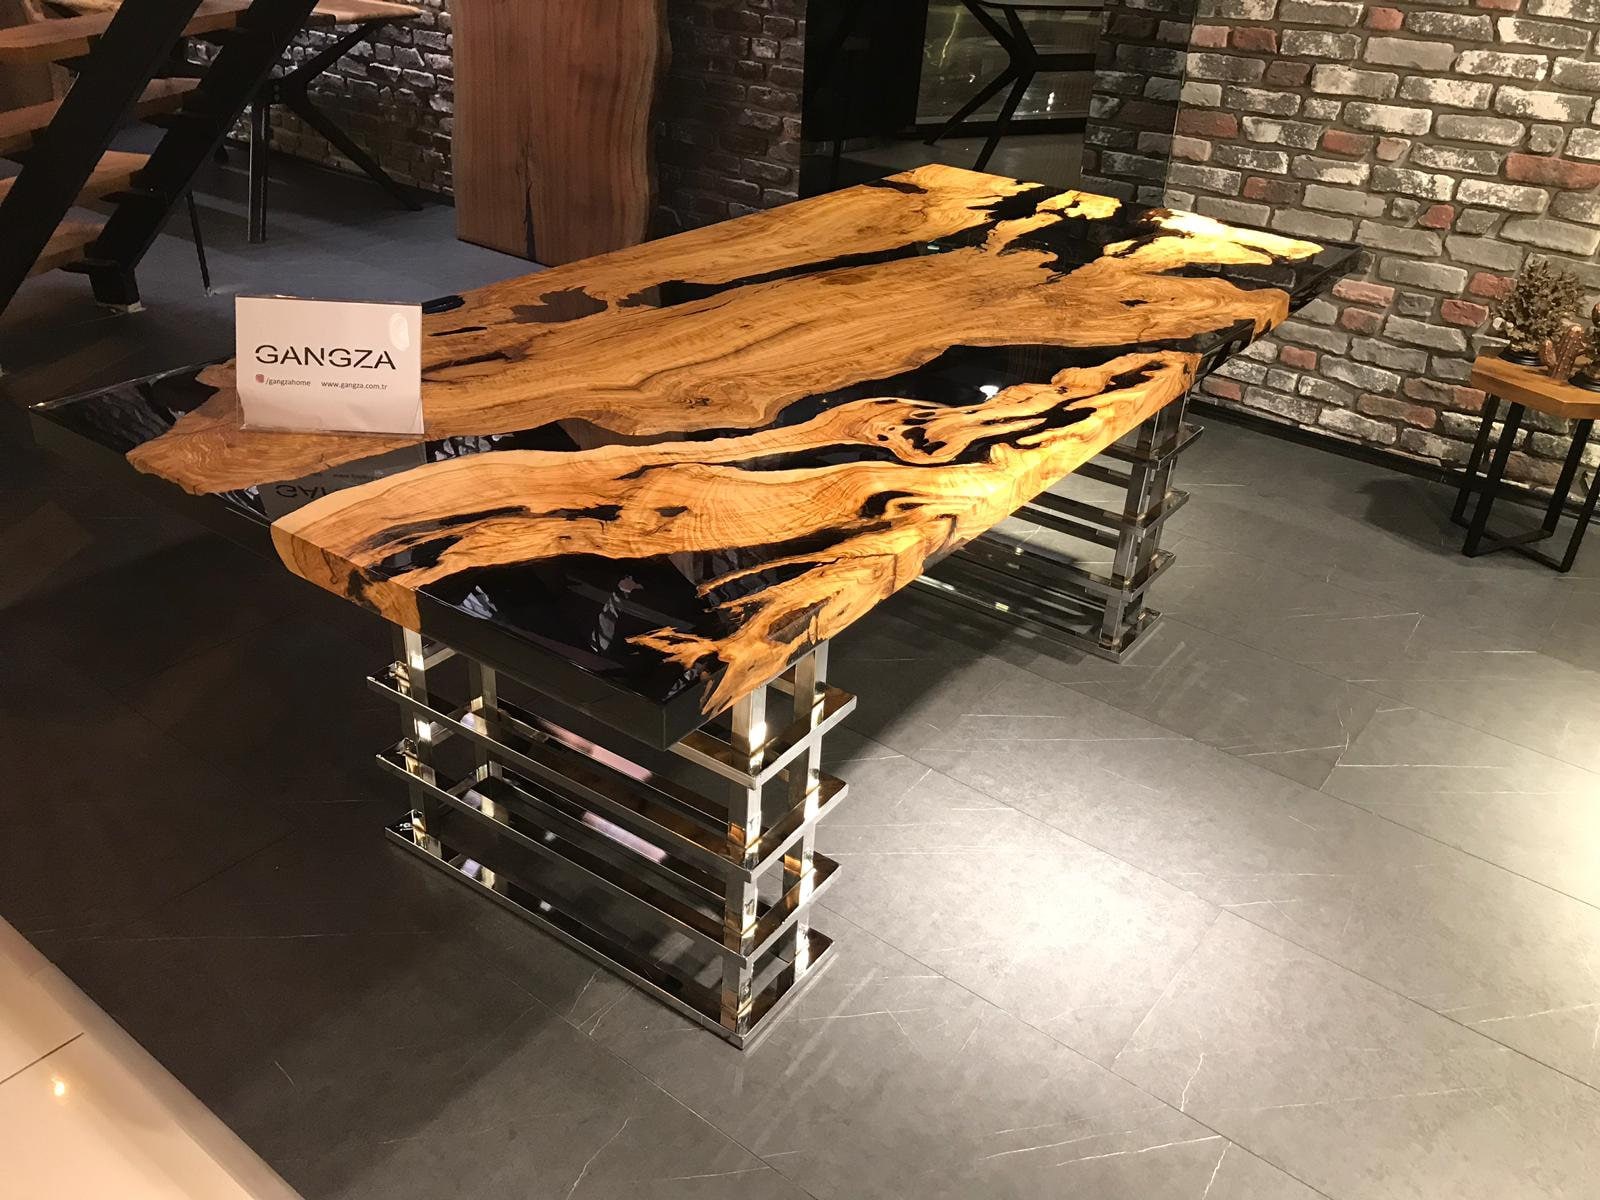 Madet to Order Olive Wood Epoxy River Table Top, Black Resin River